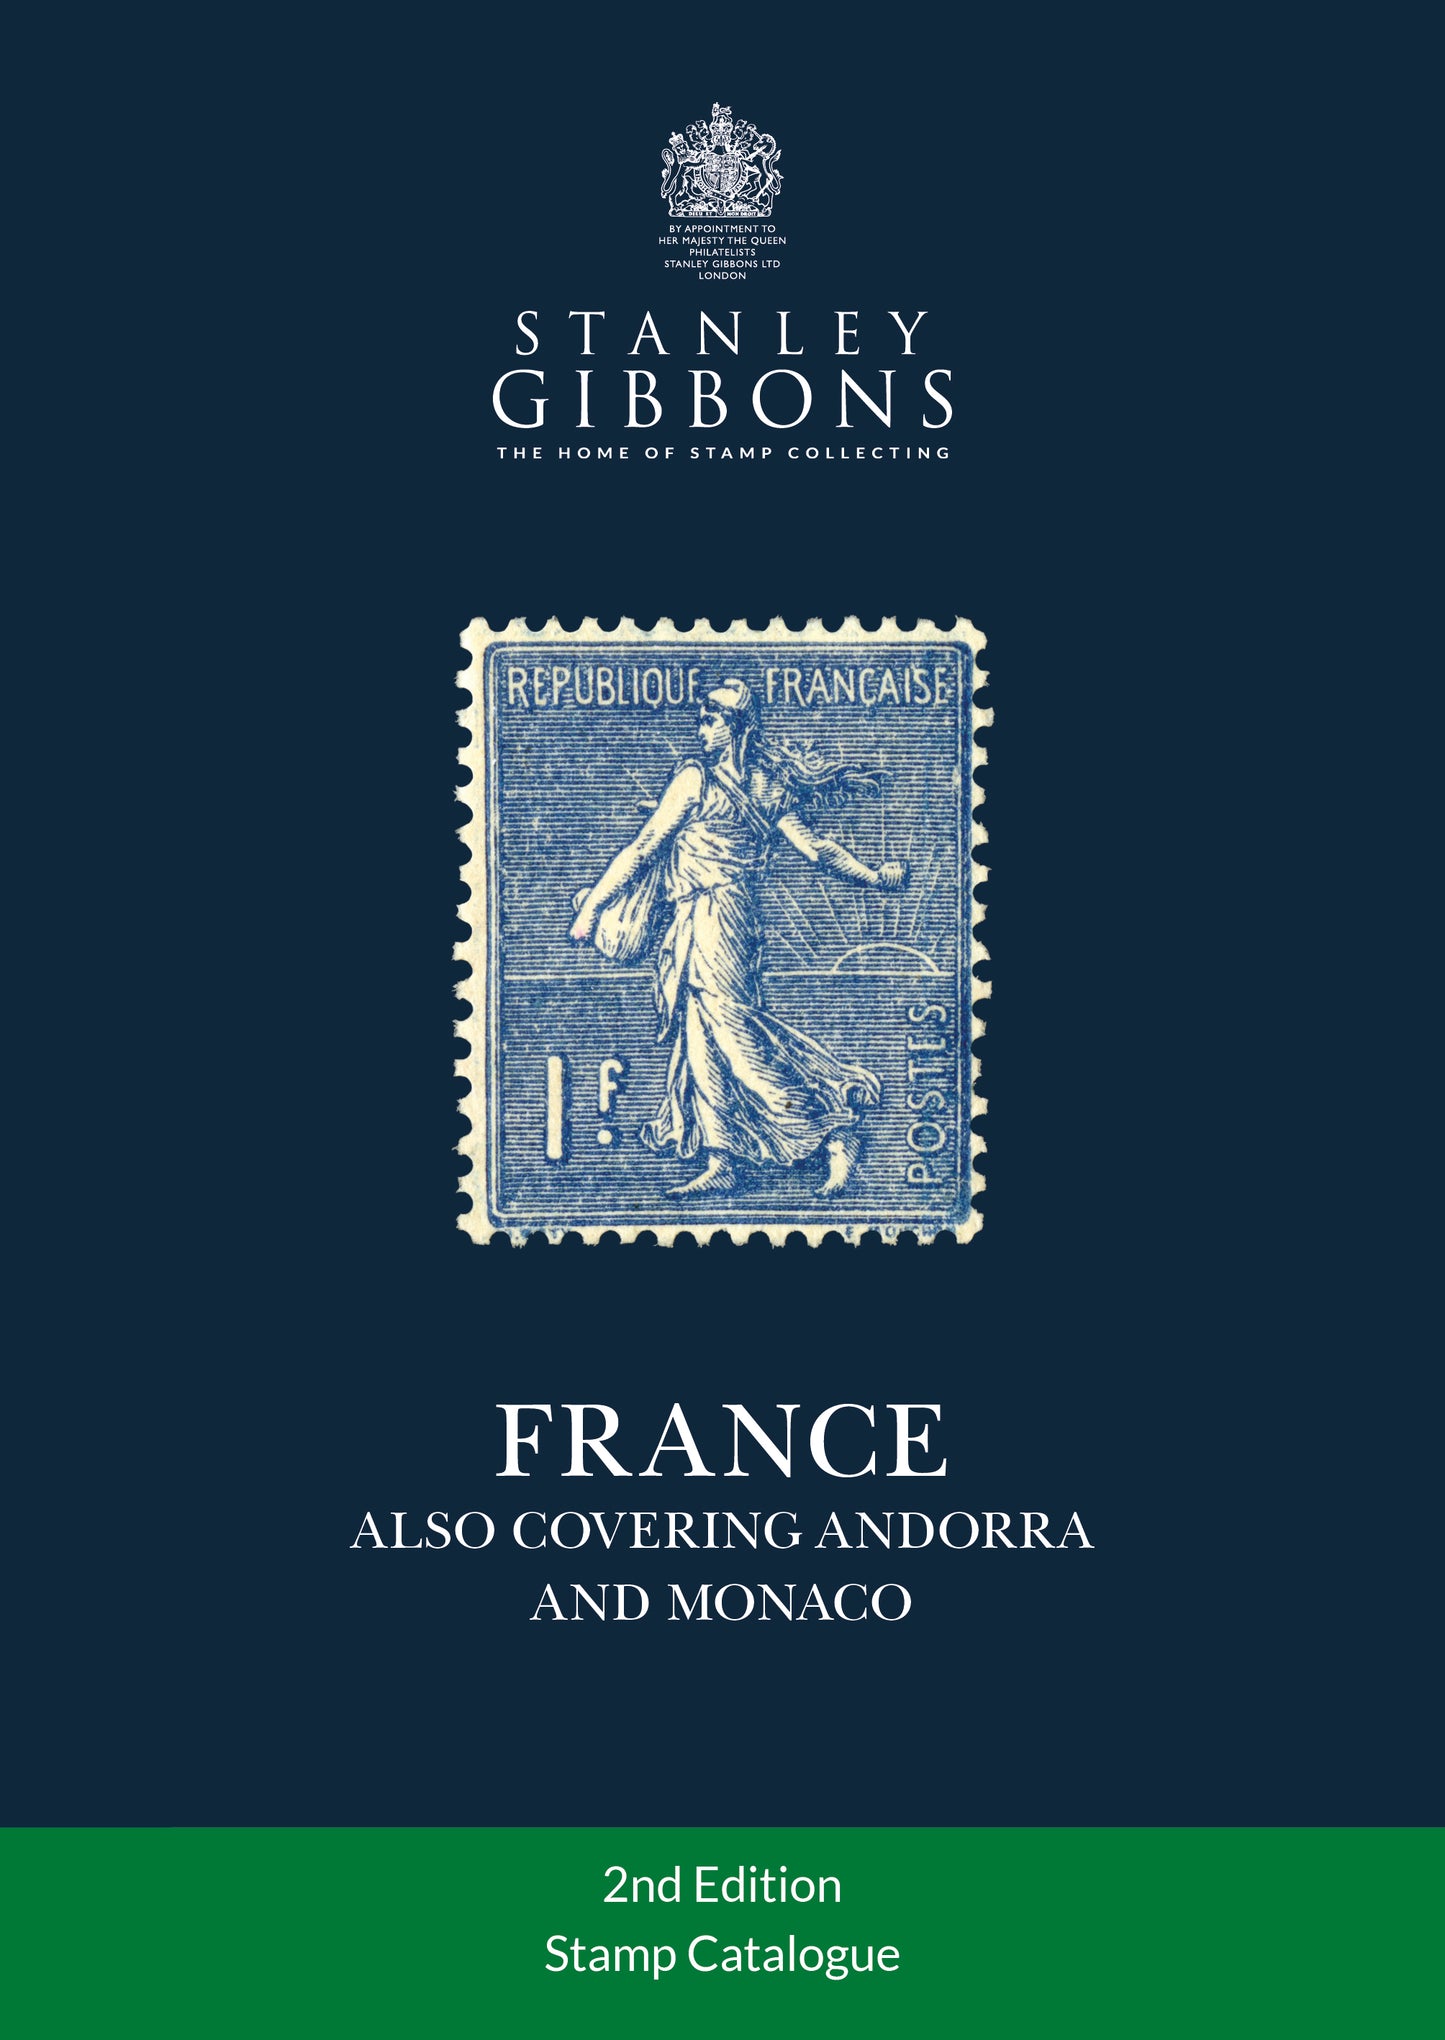 France Stamp Catalogue 2nd Edition